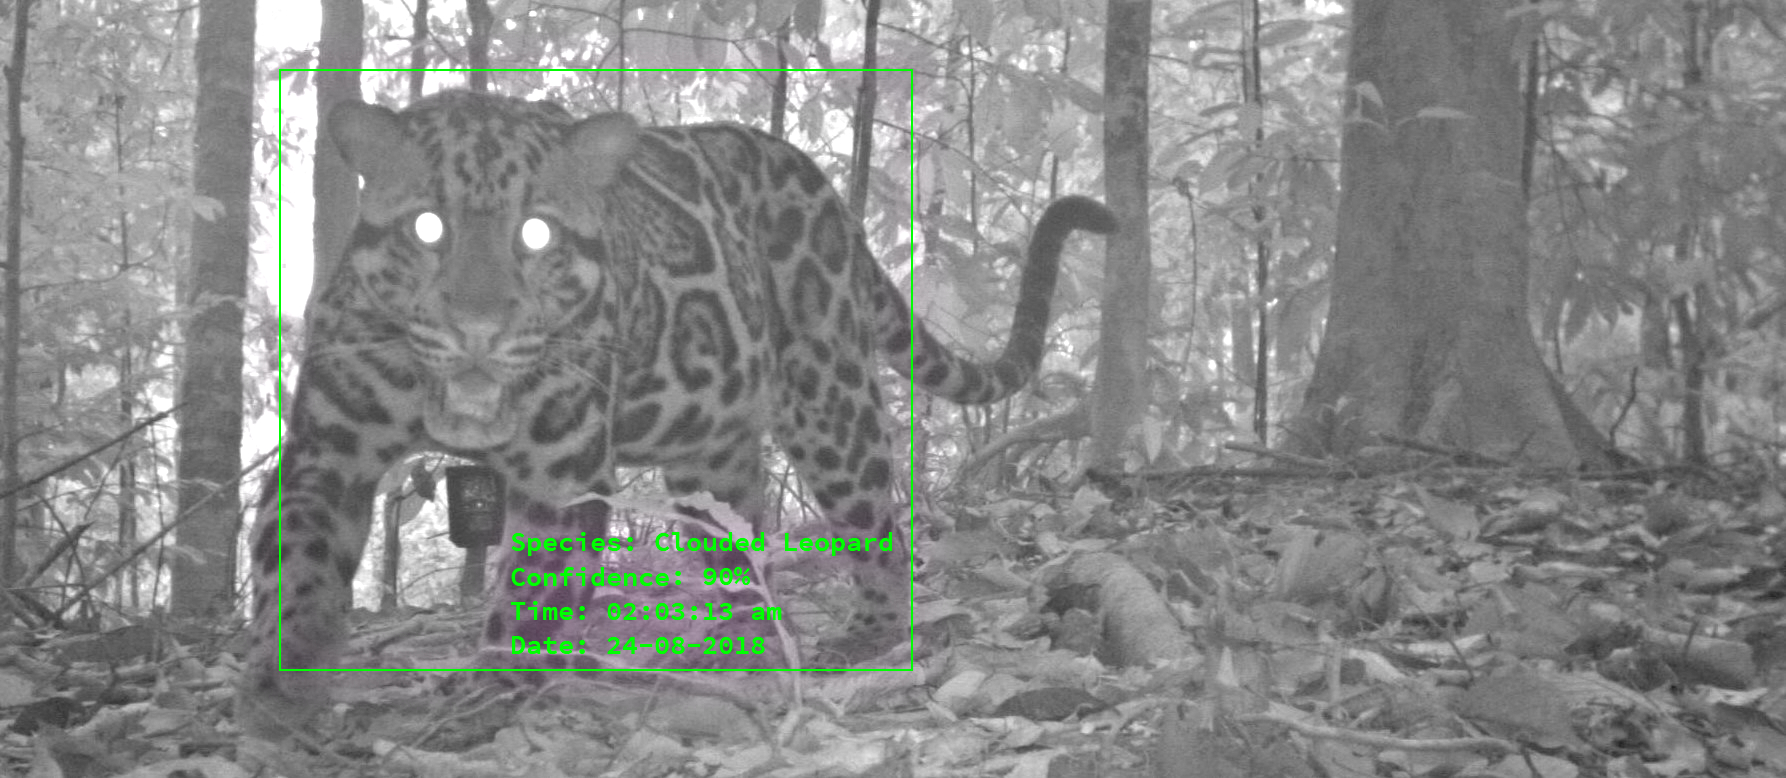 During the Kick-Start activity in 2018, Archangel Imaging’s Wildlife Advance Monitoring camera was able to identify certain species and capture images of them when they passed nearby – in this capturing an image of a clouded leopard in south-east Asia. Credit: Archangel Imaging